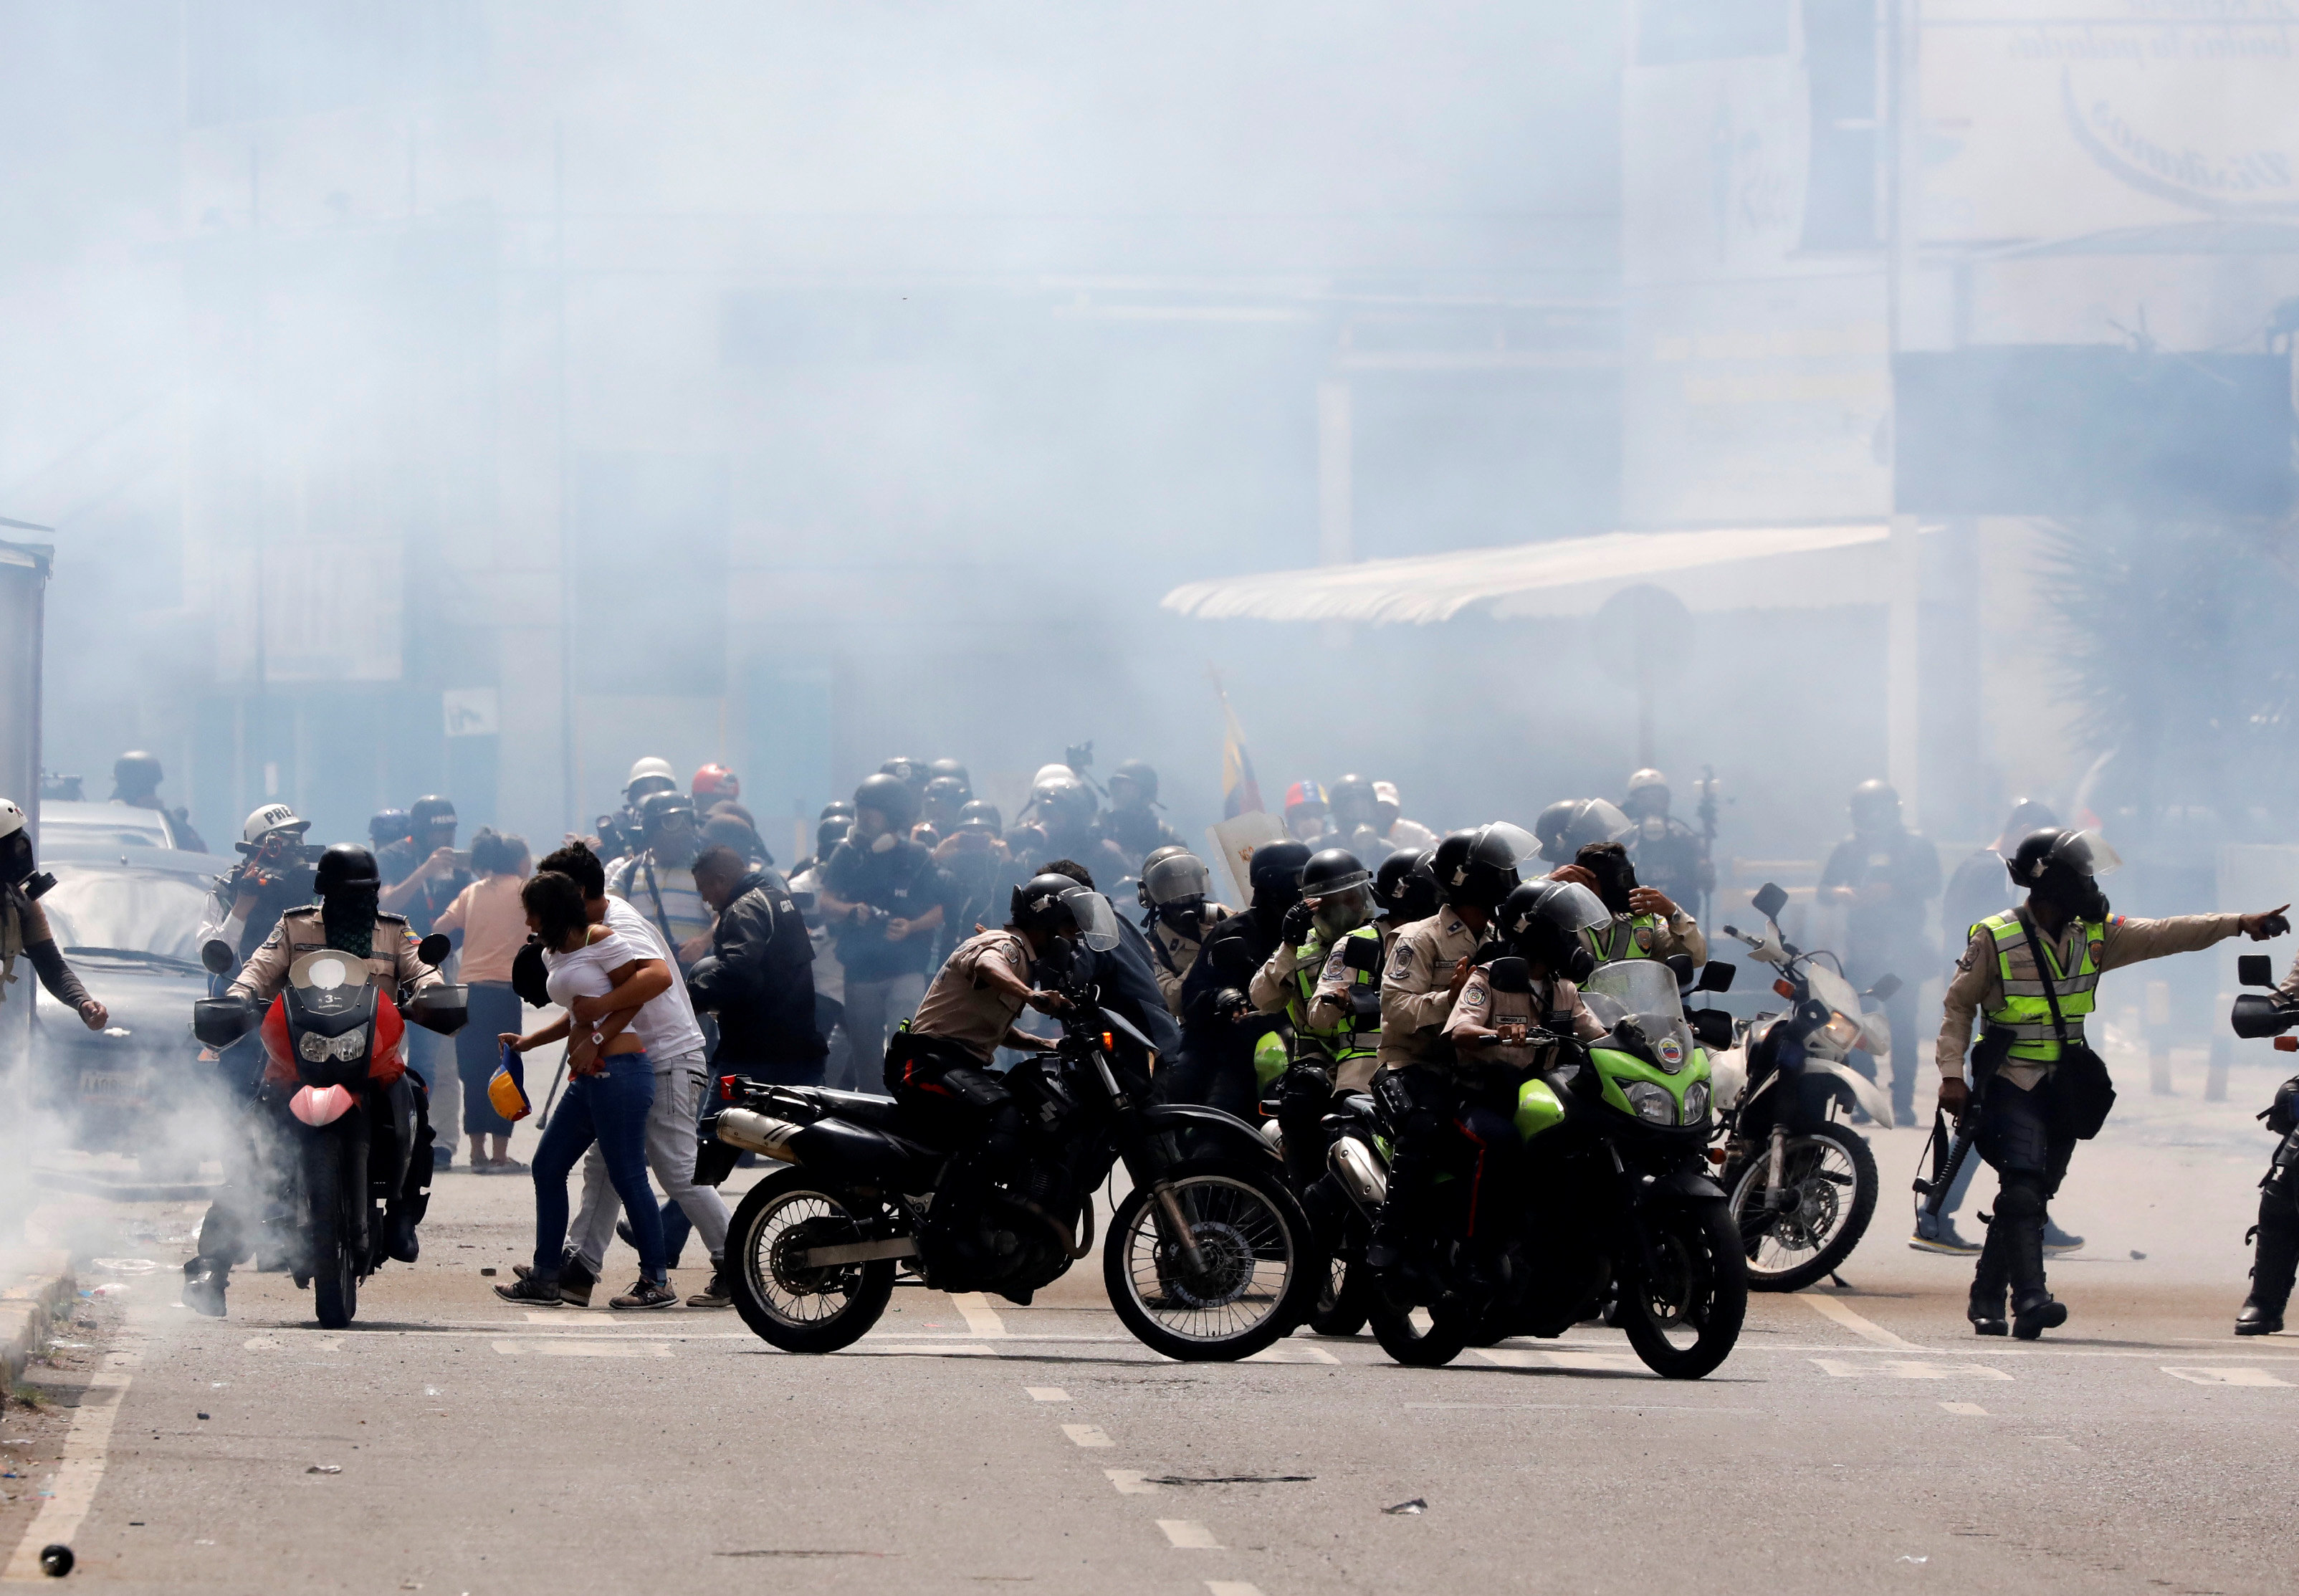 Riot security forces take up position while clashing with demonstrators rallying against Venezuela's President Nicolas Maduro in Caracas, Venezuela, June 10, 2017. REUTERS/Carlos Garcia Rawlins